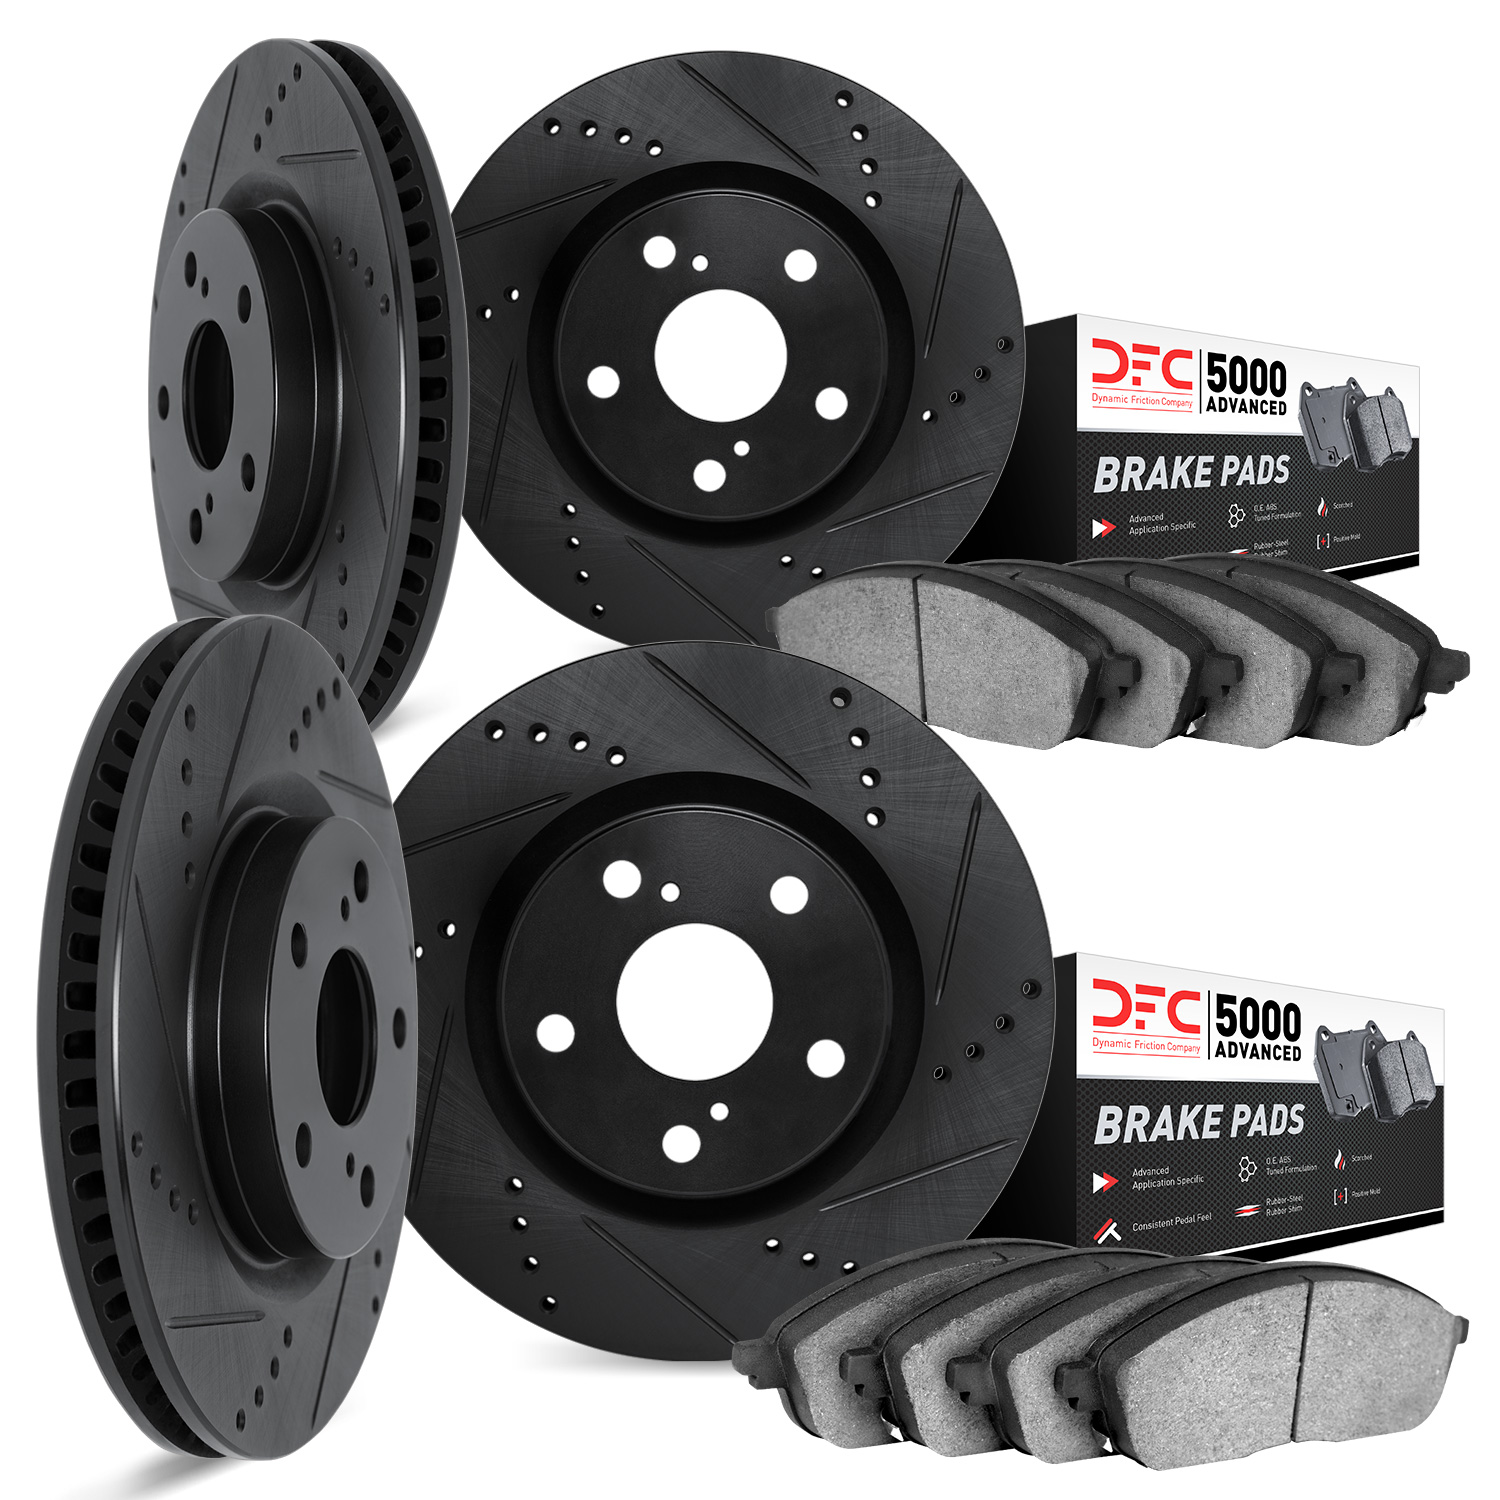 8504-67104 Drilled/Slotted Brake Rotors w/5000 Advanced Brake Pads Kit [Black], 2003-2011 Infiniti/Nissan, Position: Front and R